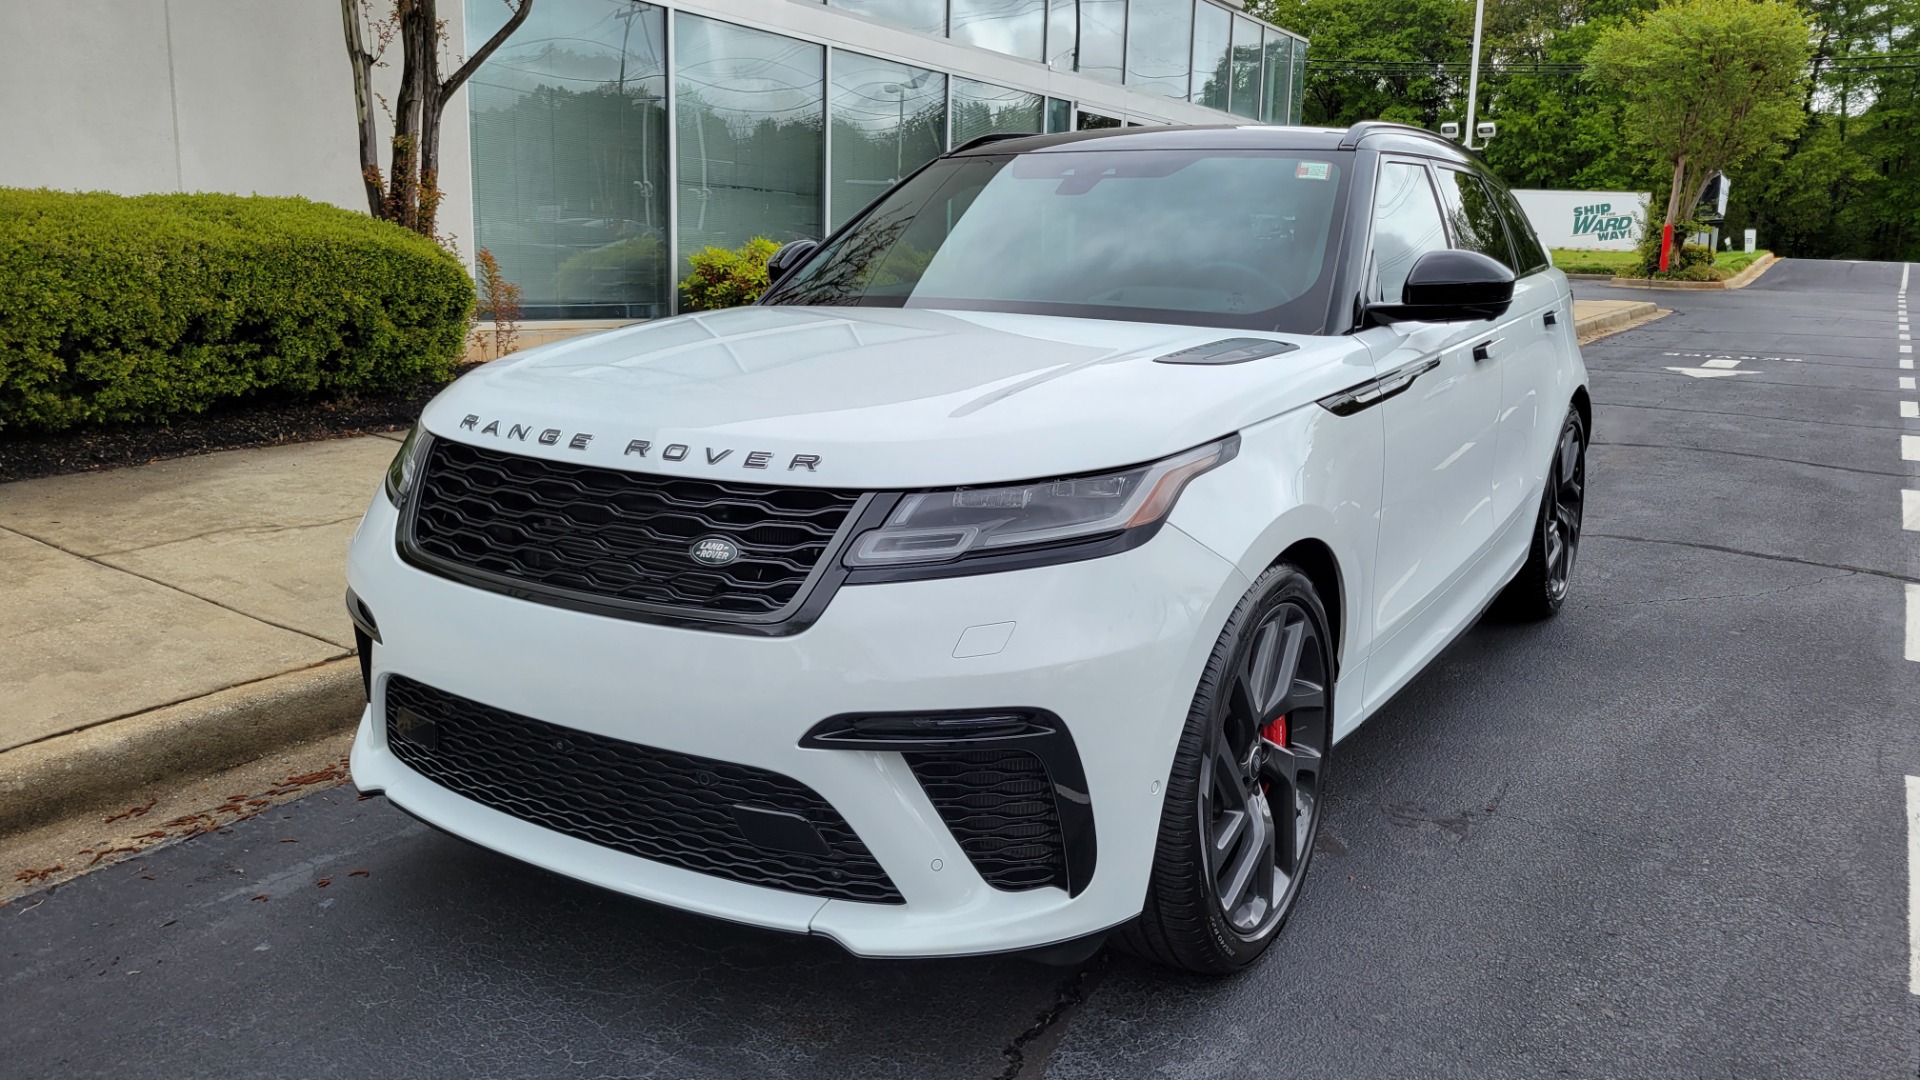 Used 2020 Land Rover RANGE ROVER VELAR SVAUTOBIOGRAPHY DYNAMIC ED / NAV / SUNROOF for sale $95,495 at Formula Imports in Charlotte NC 28227 3